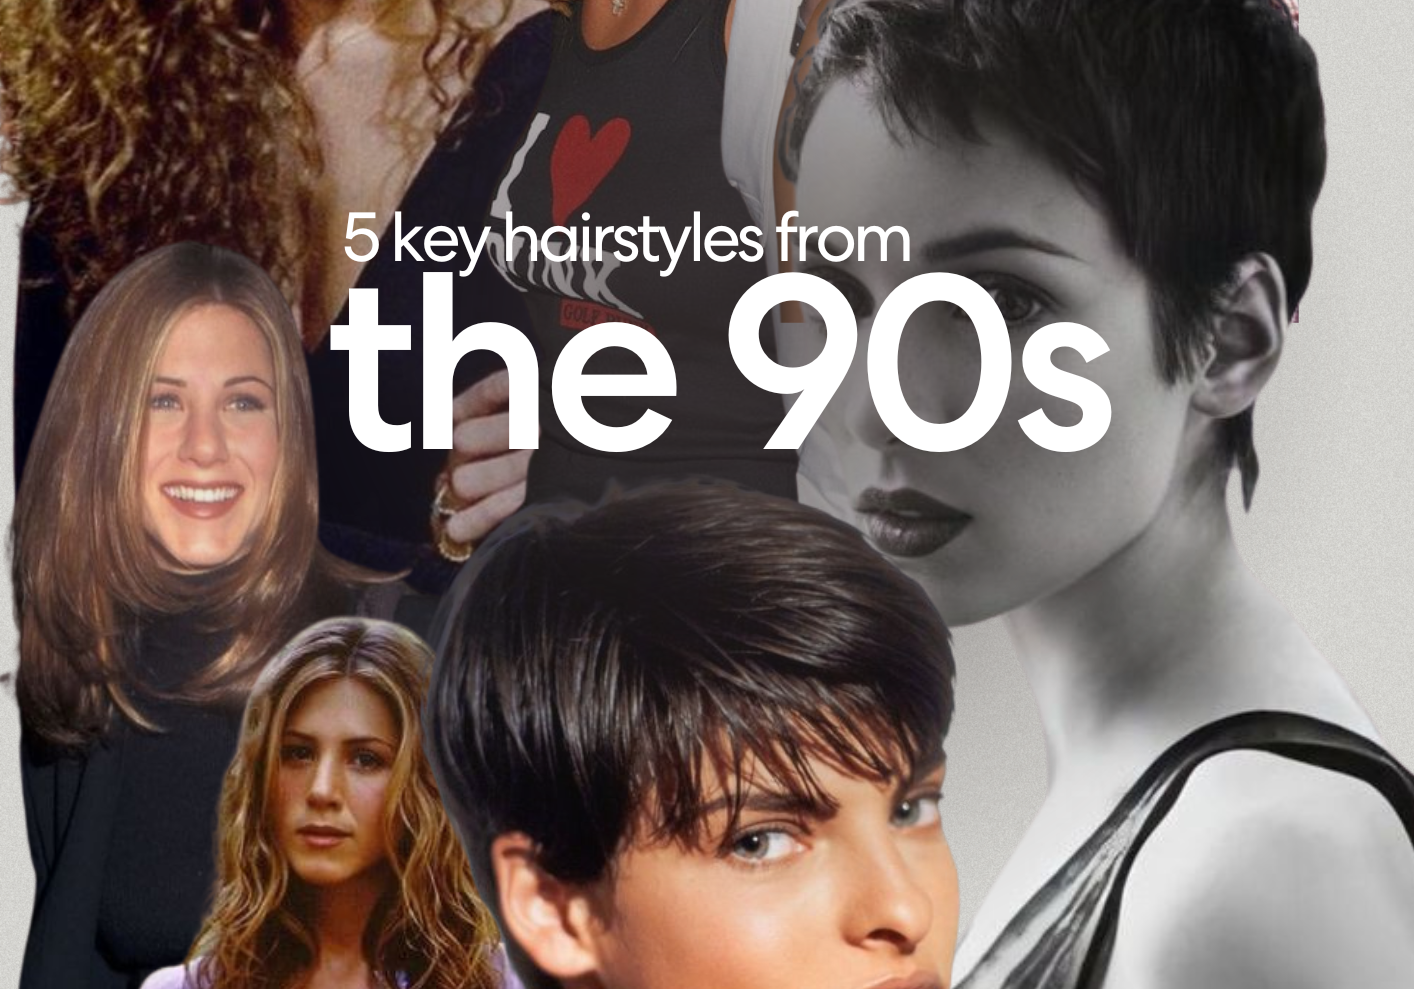 5 key hairstyles from the ’90s to wear now